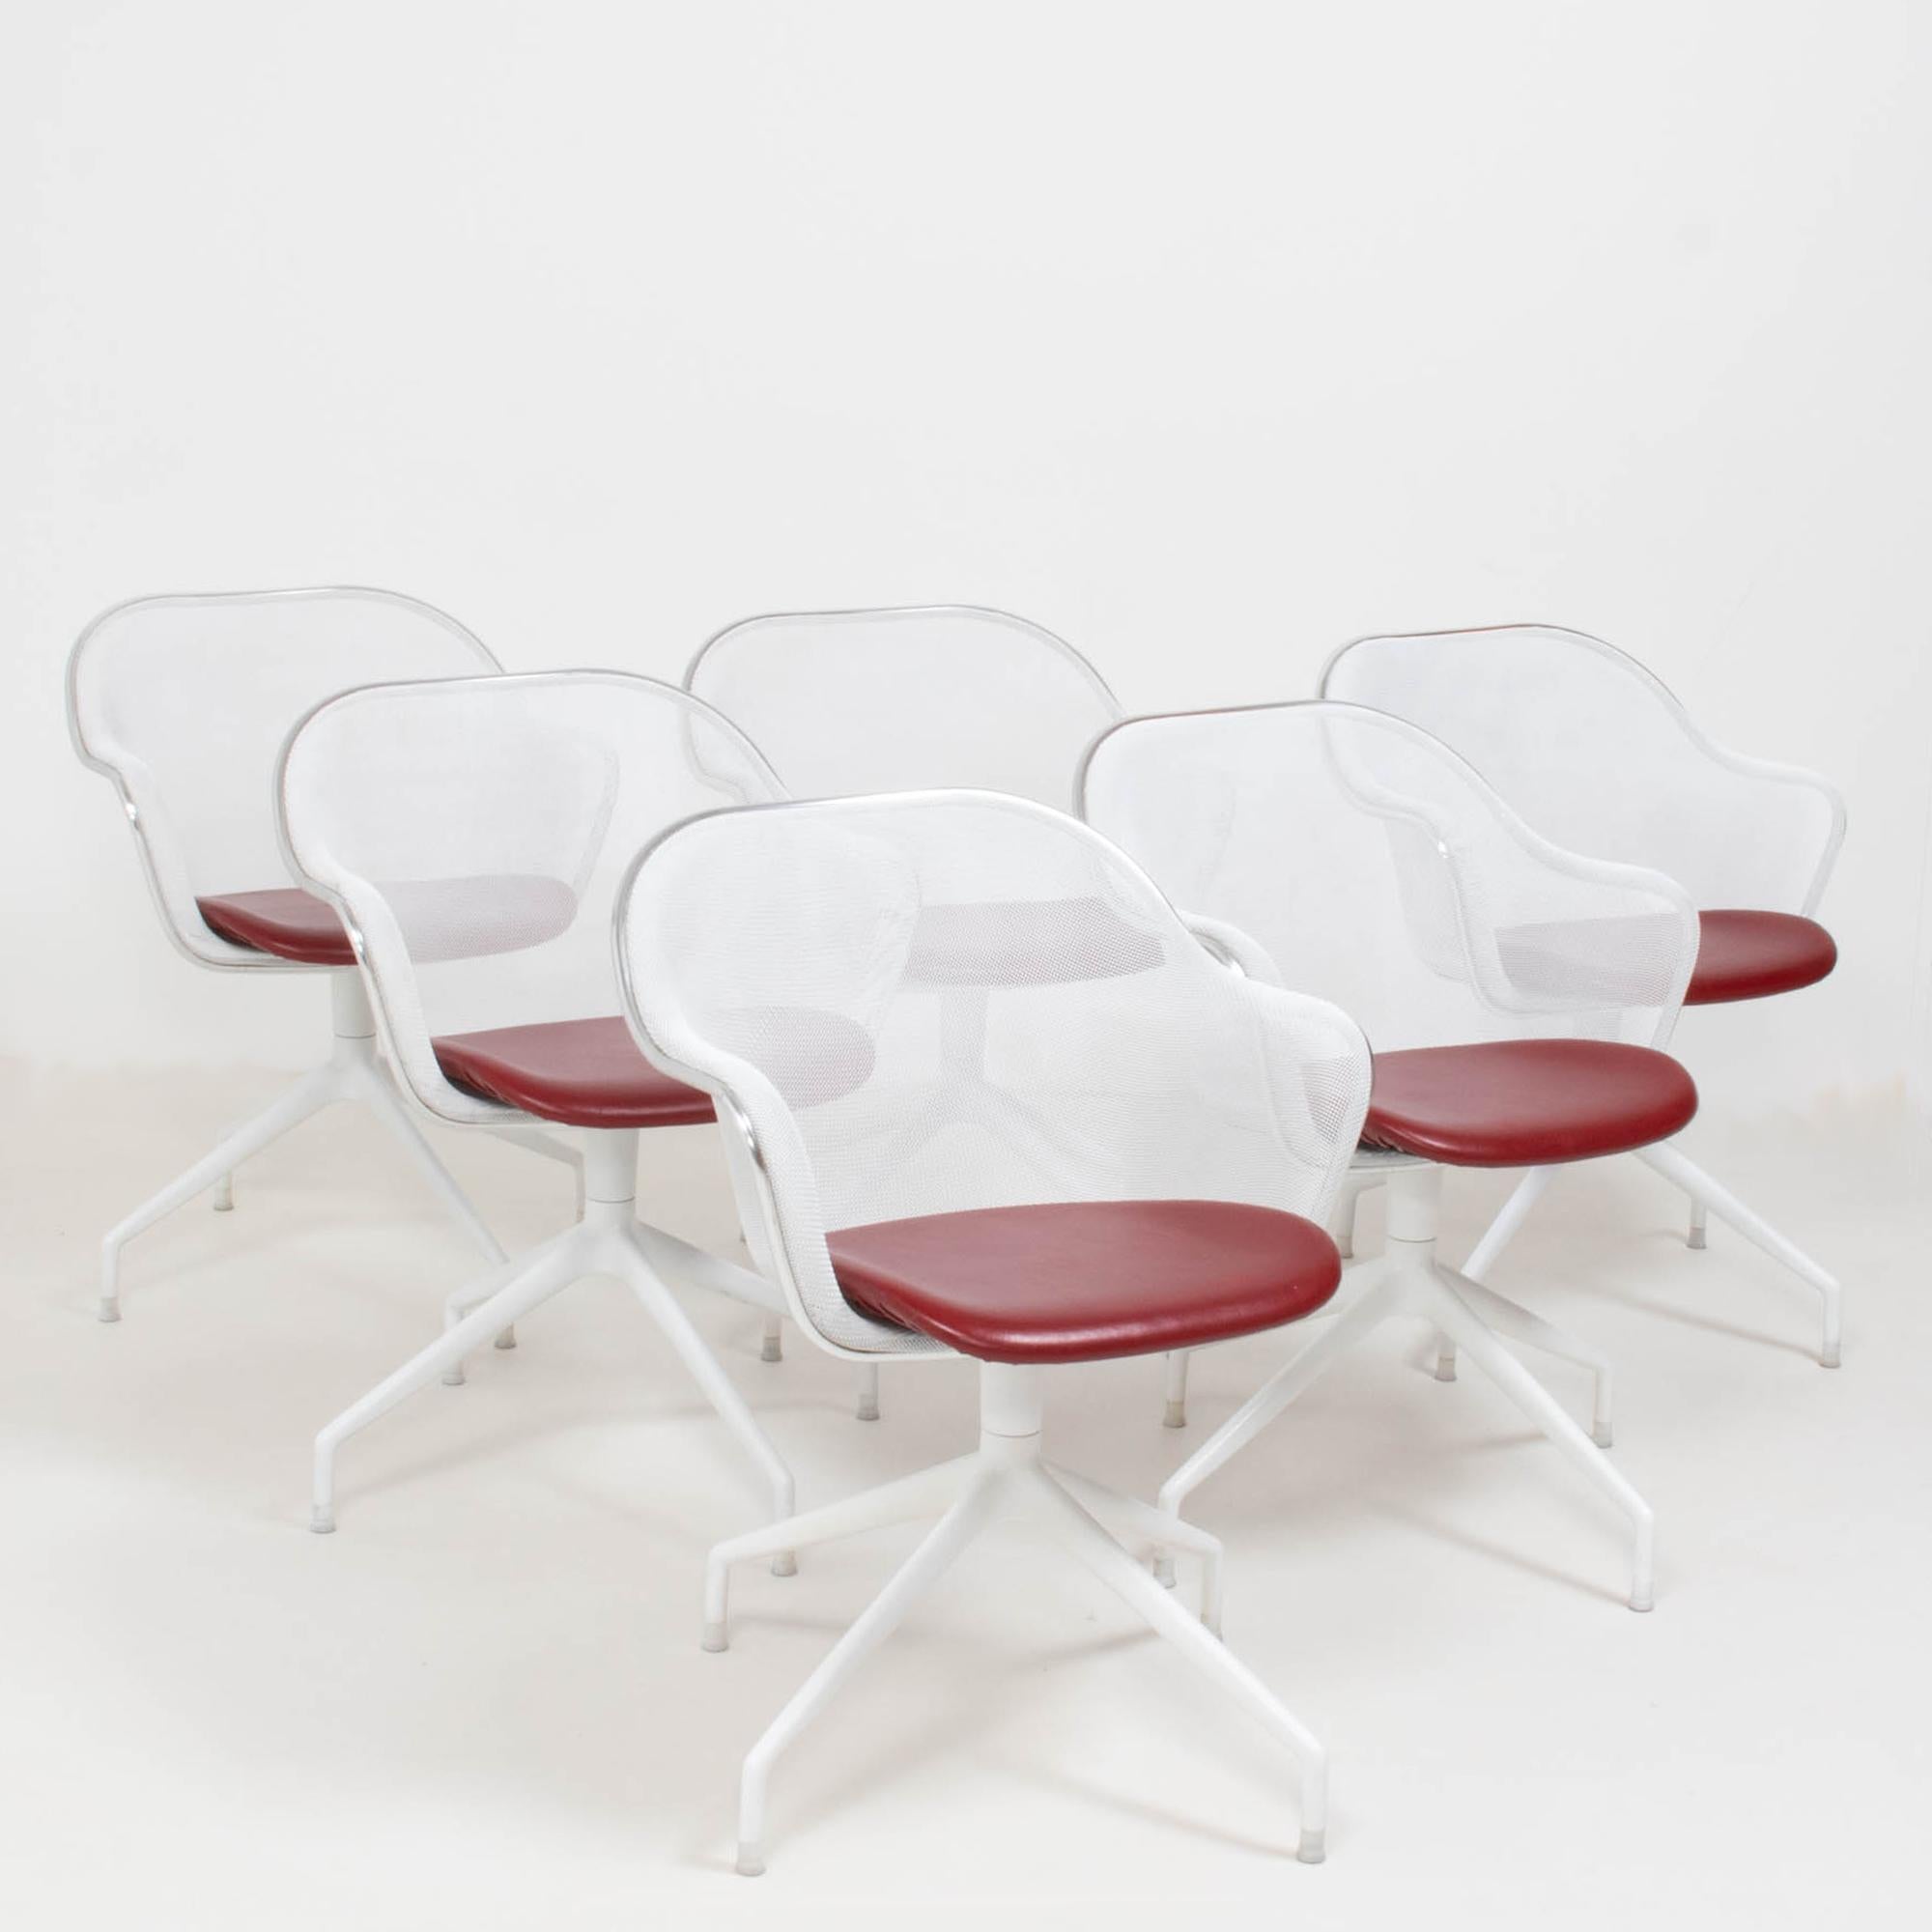 Designed by Antonio Citterio for B&B Italia in 2000, the Luta dining chair has become an iconic design for the brand.

Constructed from a light steel mesh sprayed in white, the chairs feature a contrasting aluminium perimeter profile which creates